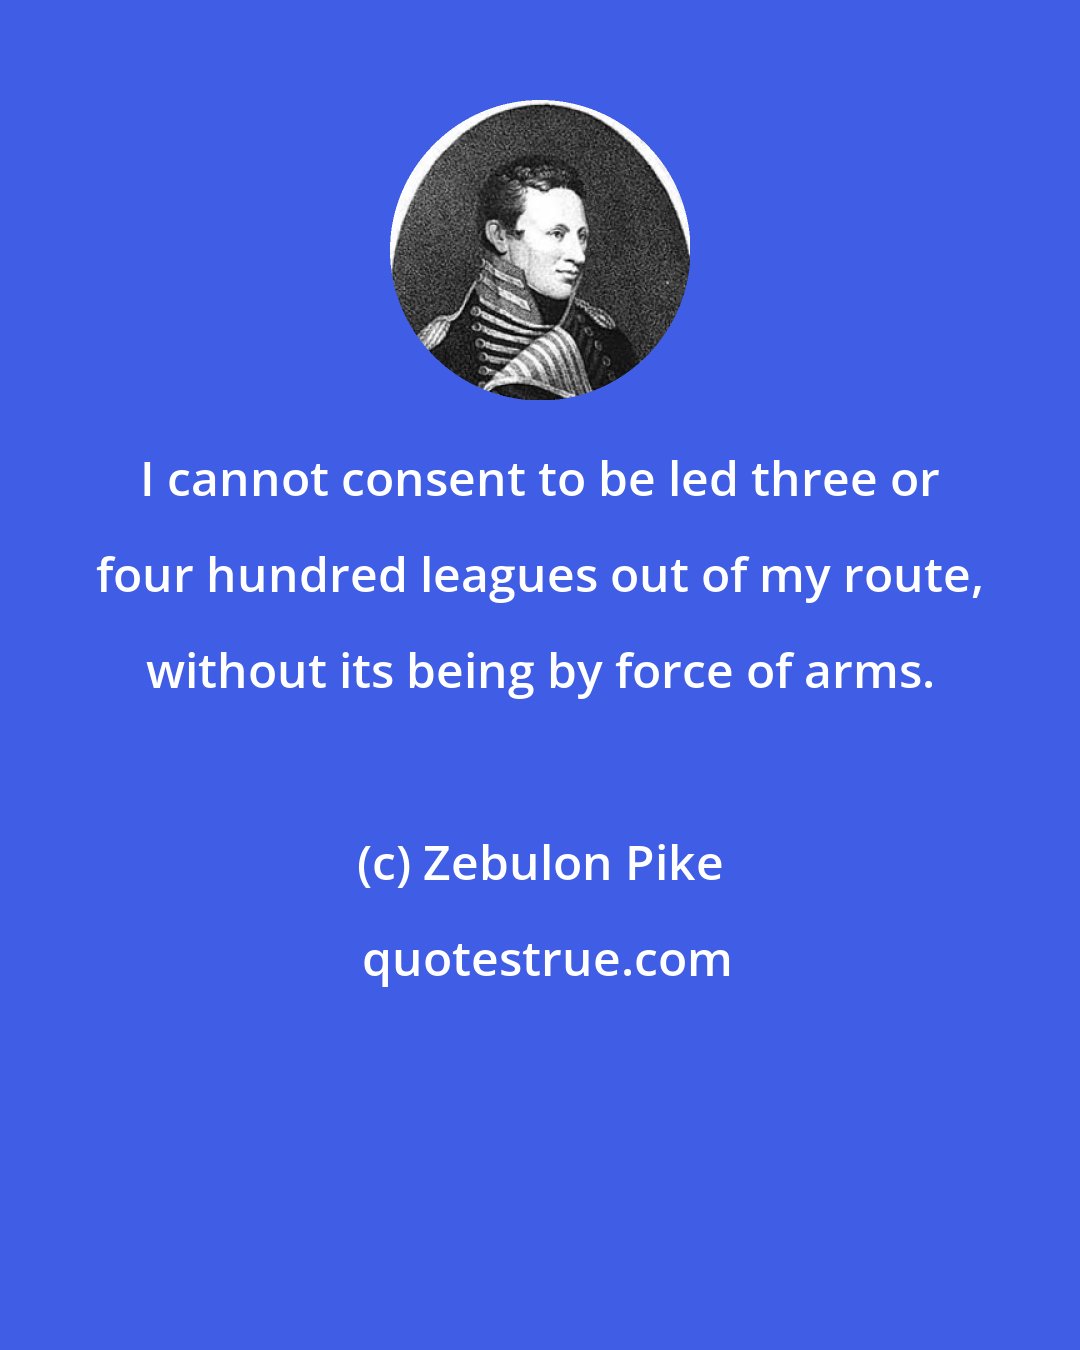 Zebulon Pike: I cannot consent to be led three or four hundred leagues out of my route, without its being by force of arms.